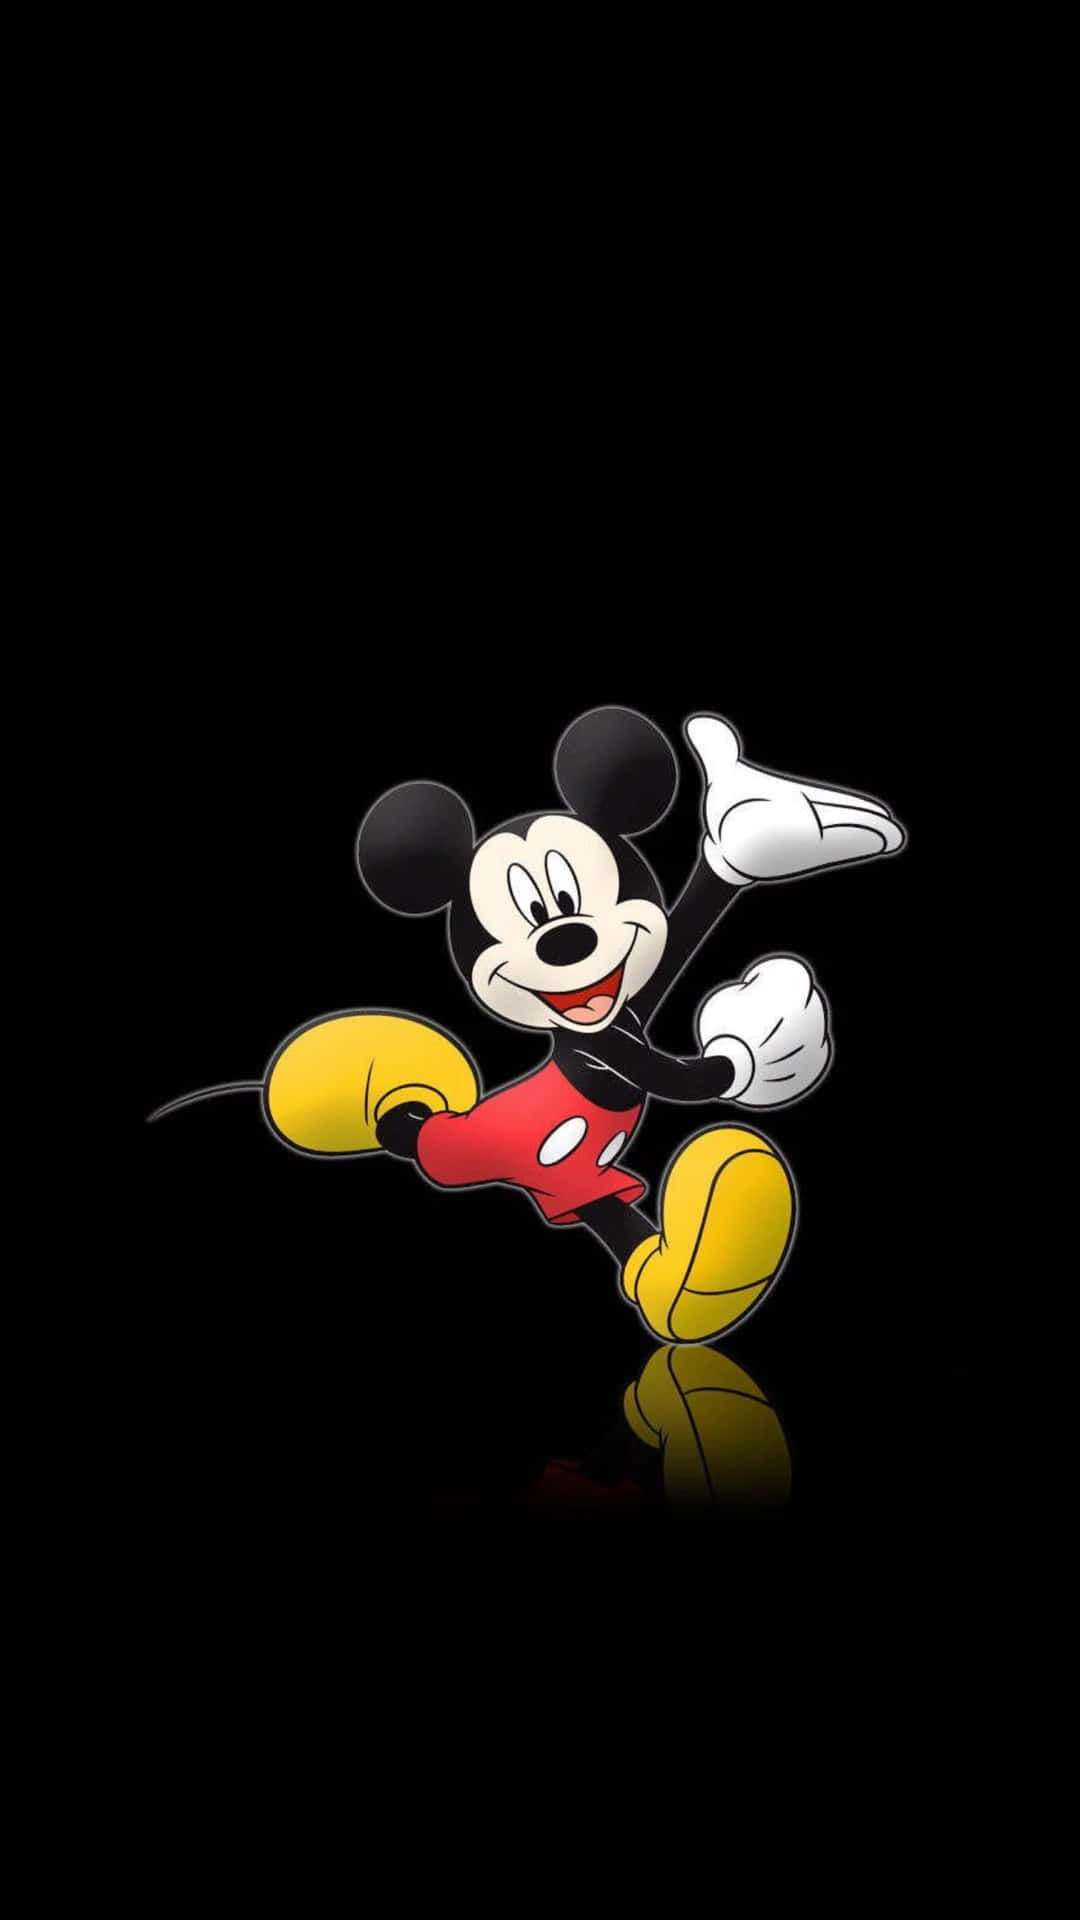 Willkommenzu Hause, Mickey Mouse! Wallpaper